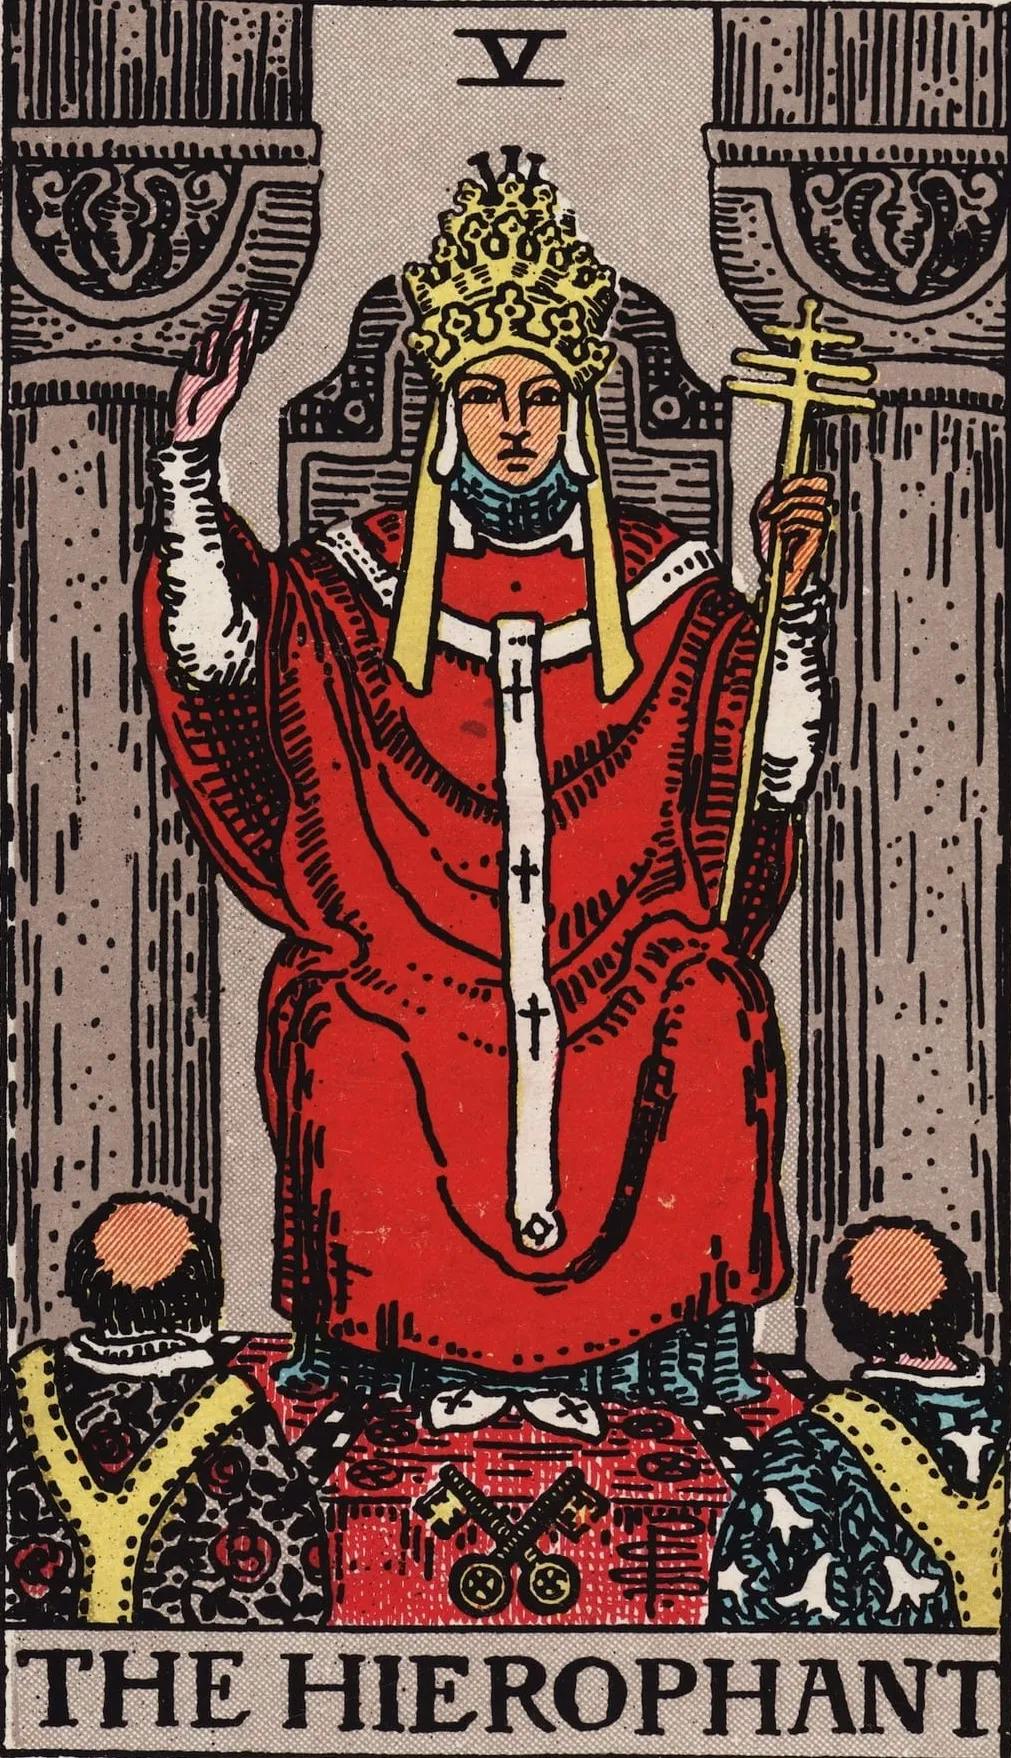 The Hierophant Card